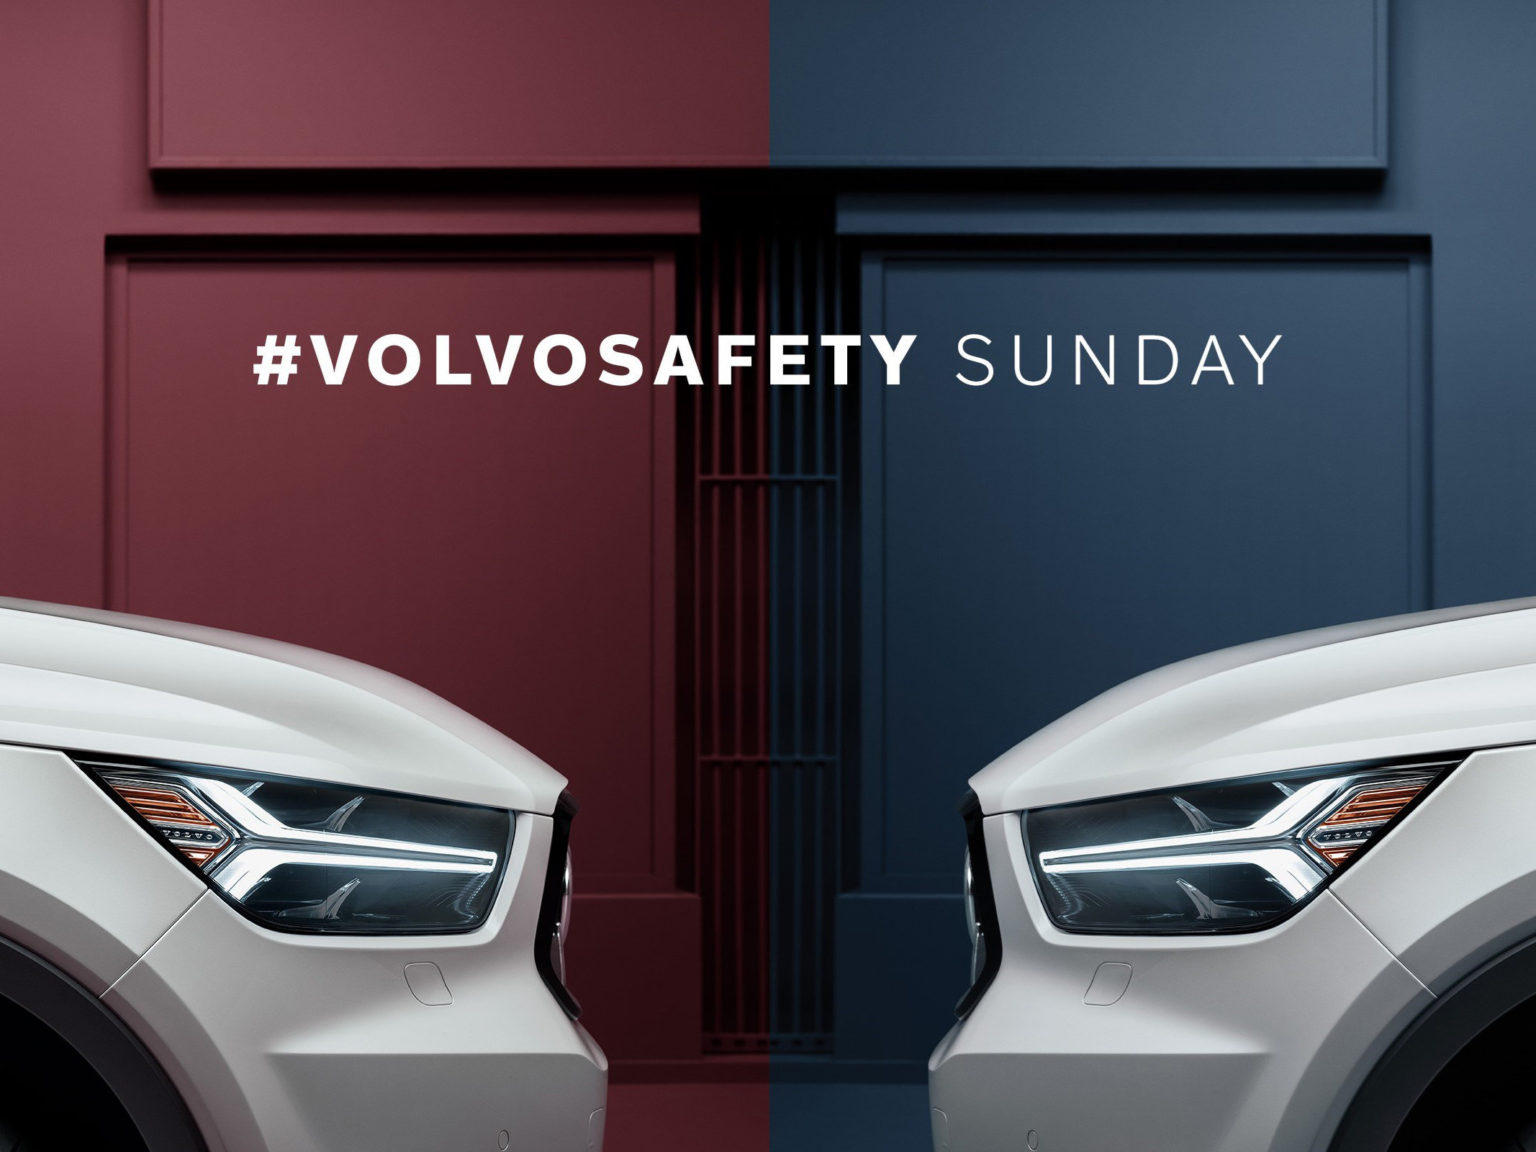 Volvo is giving away $1 million in new cars if someone scores a safety during Super Bowl LIV.